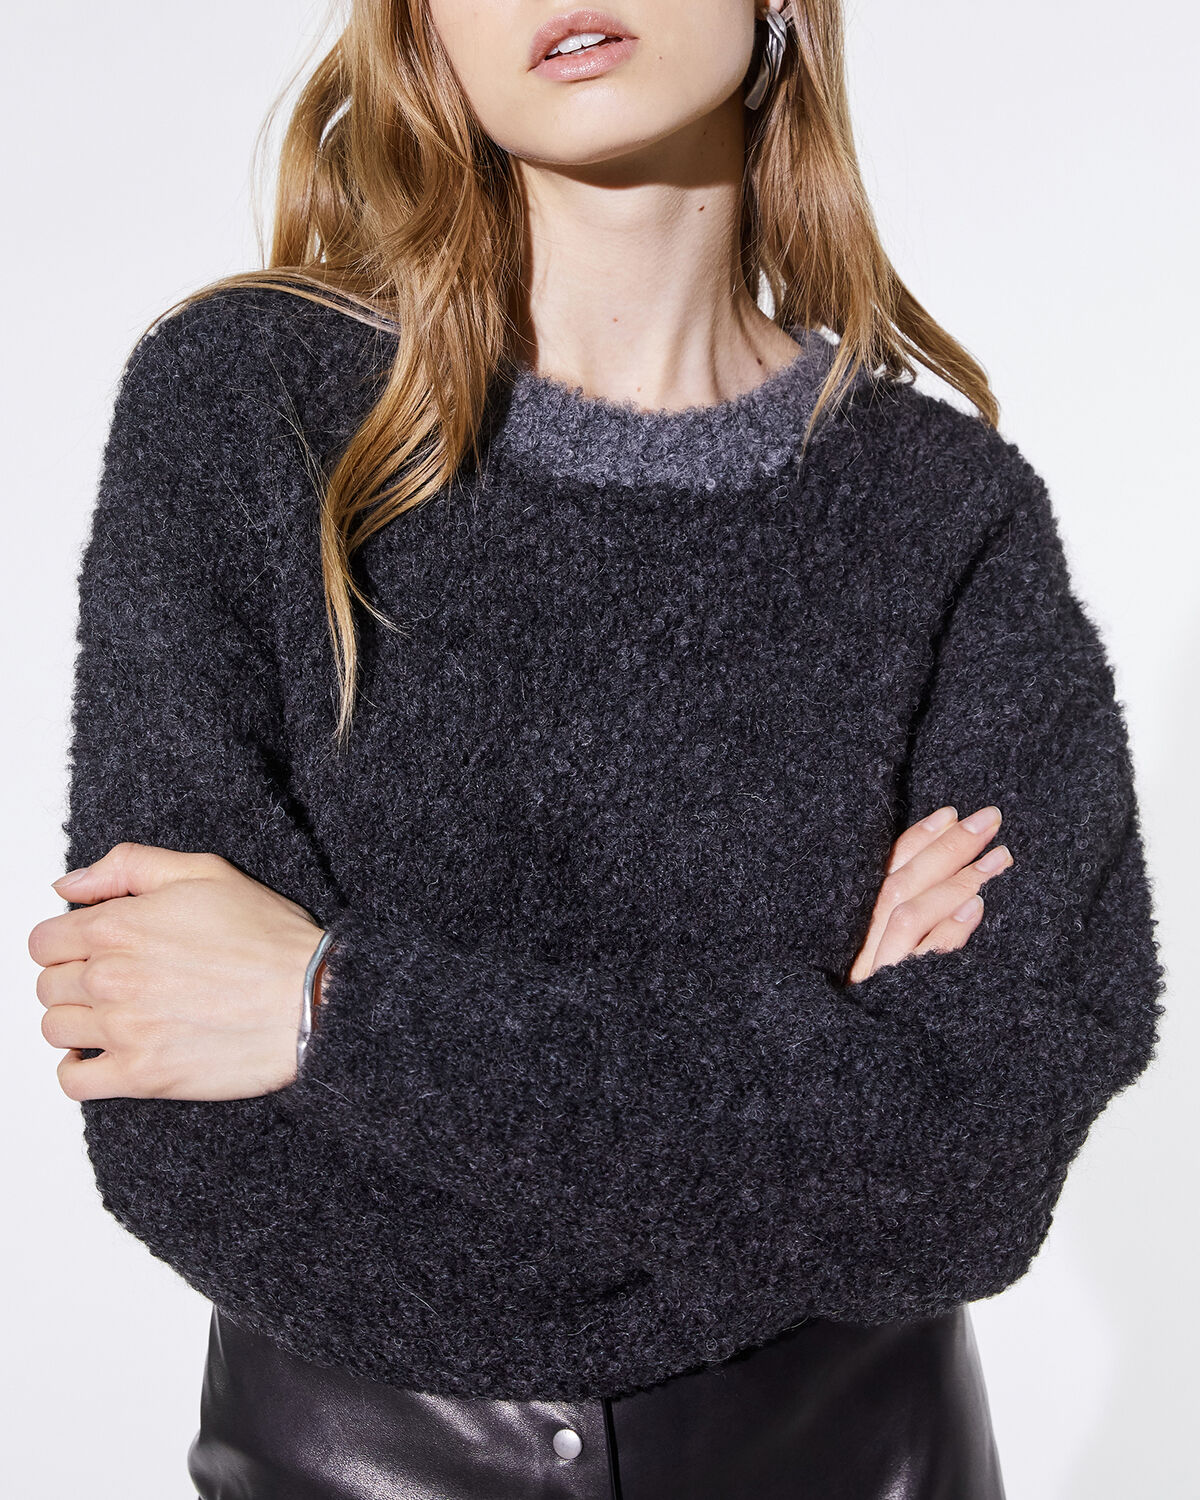 Photo of IRO Paris Yale Sweater Anthracite - Made From Alpaca And Wool, This Sweater Is Distinguished By Its Two-tone Collar. With A Slightly Oversized Cut, Wear It With A Leather Skirt For A Feminine And Urban Look. Fall Winter 19